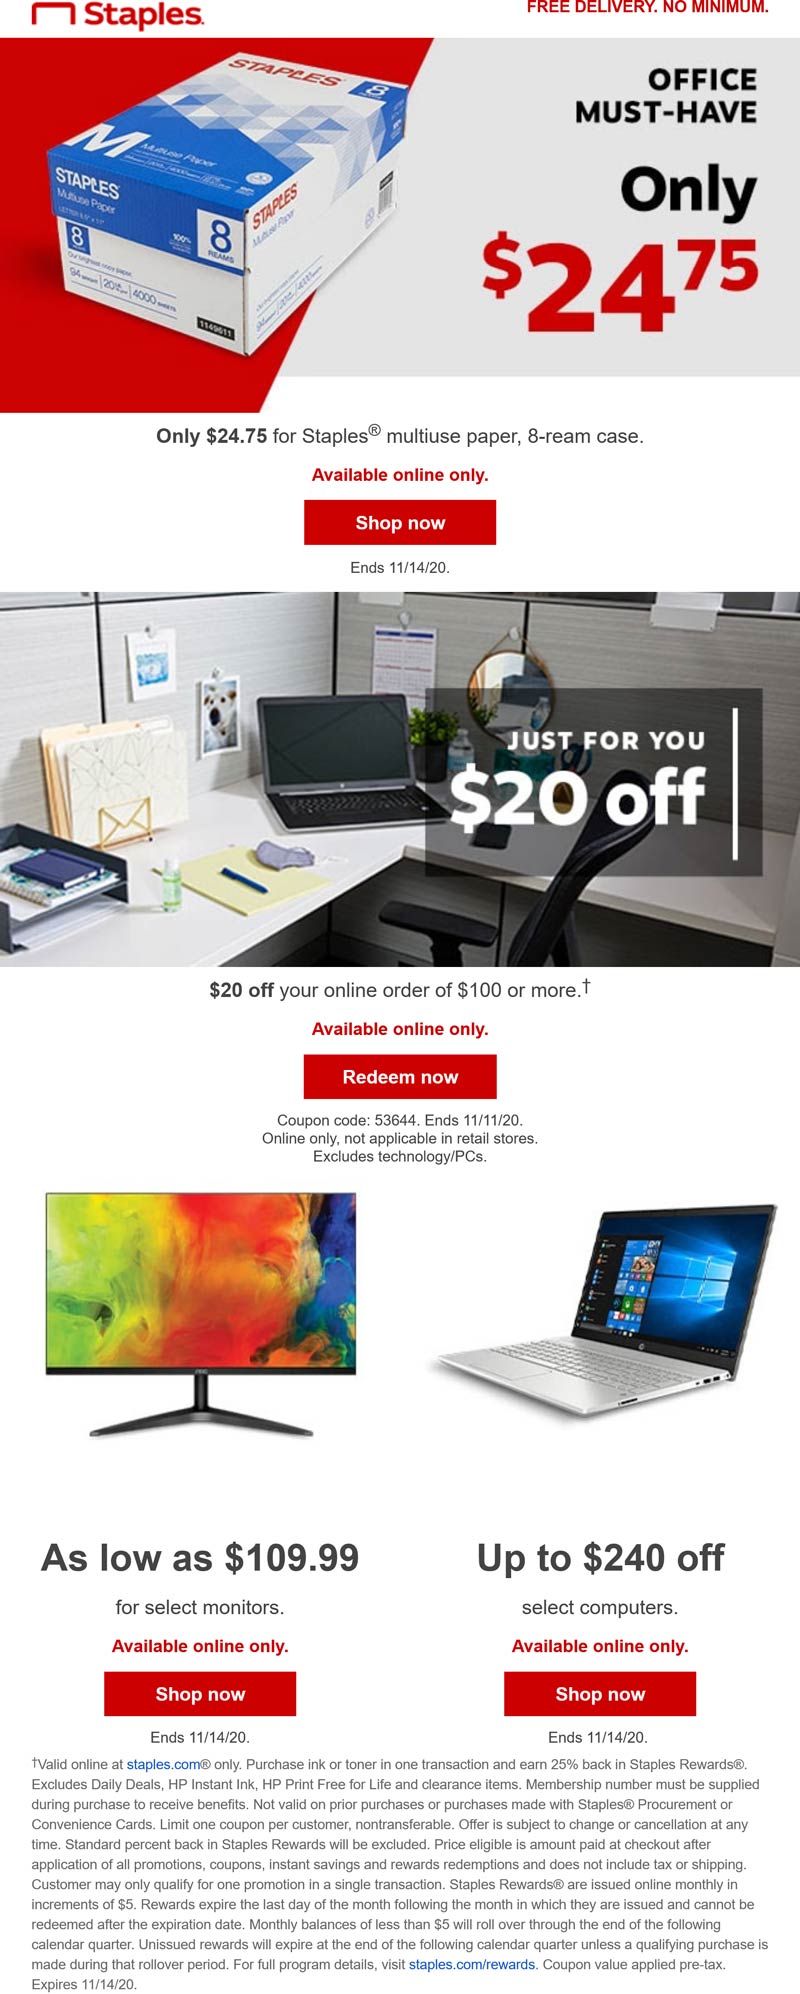 Staples stores Coupon  $20 off $100 online at Staples via promo code 53644 #staples 